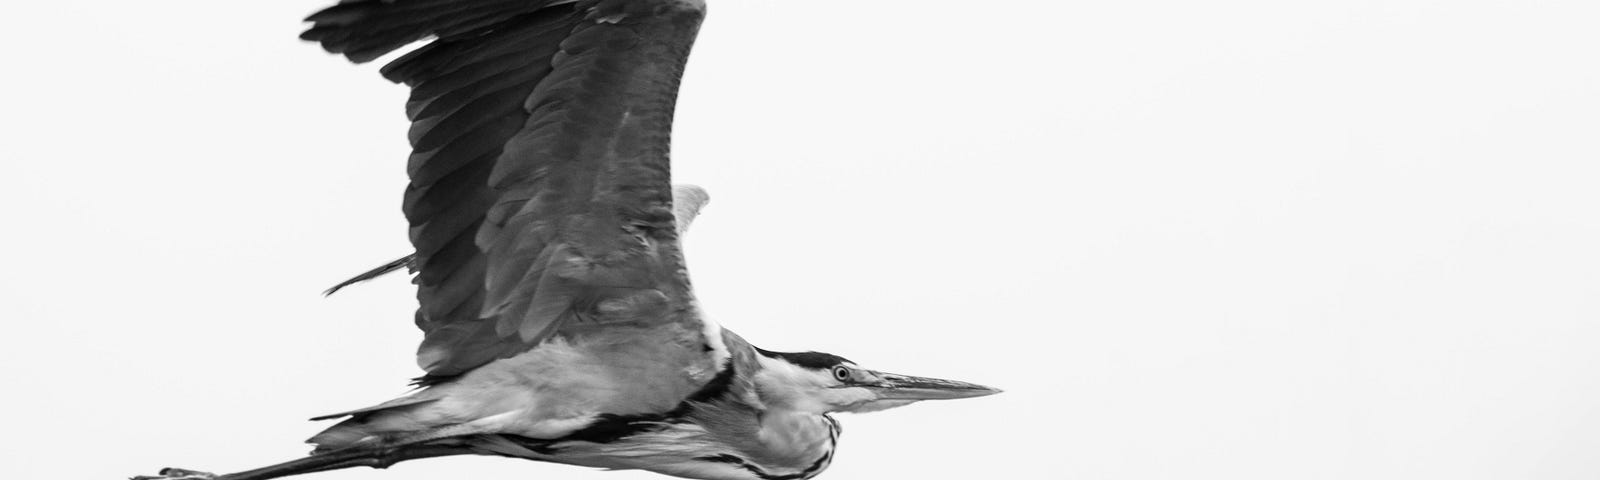 back and white photo of flying heron